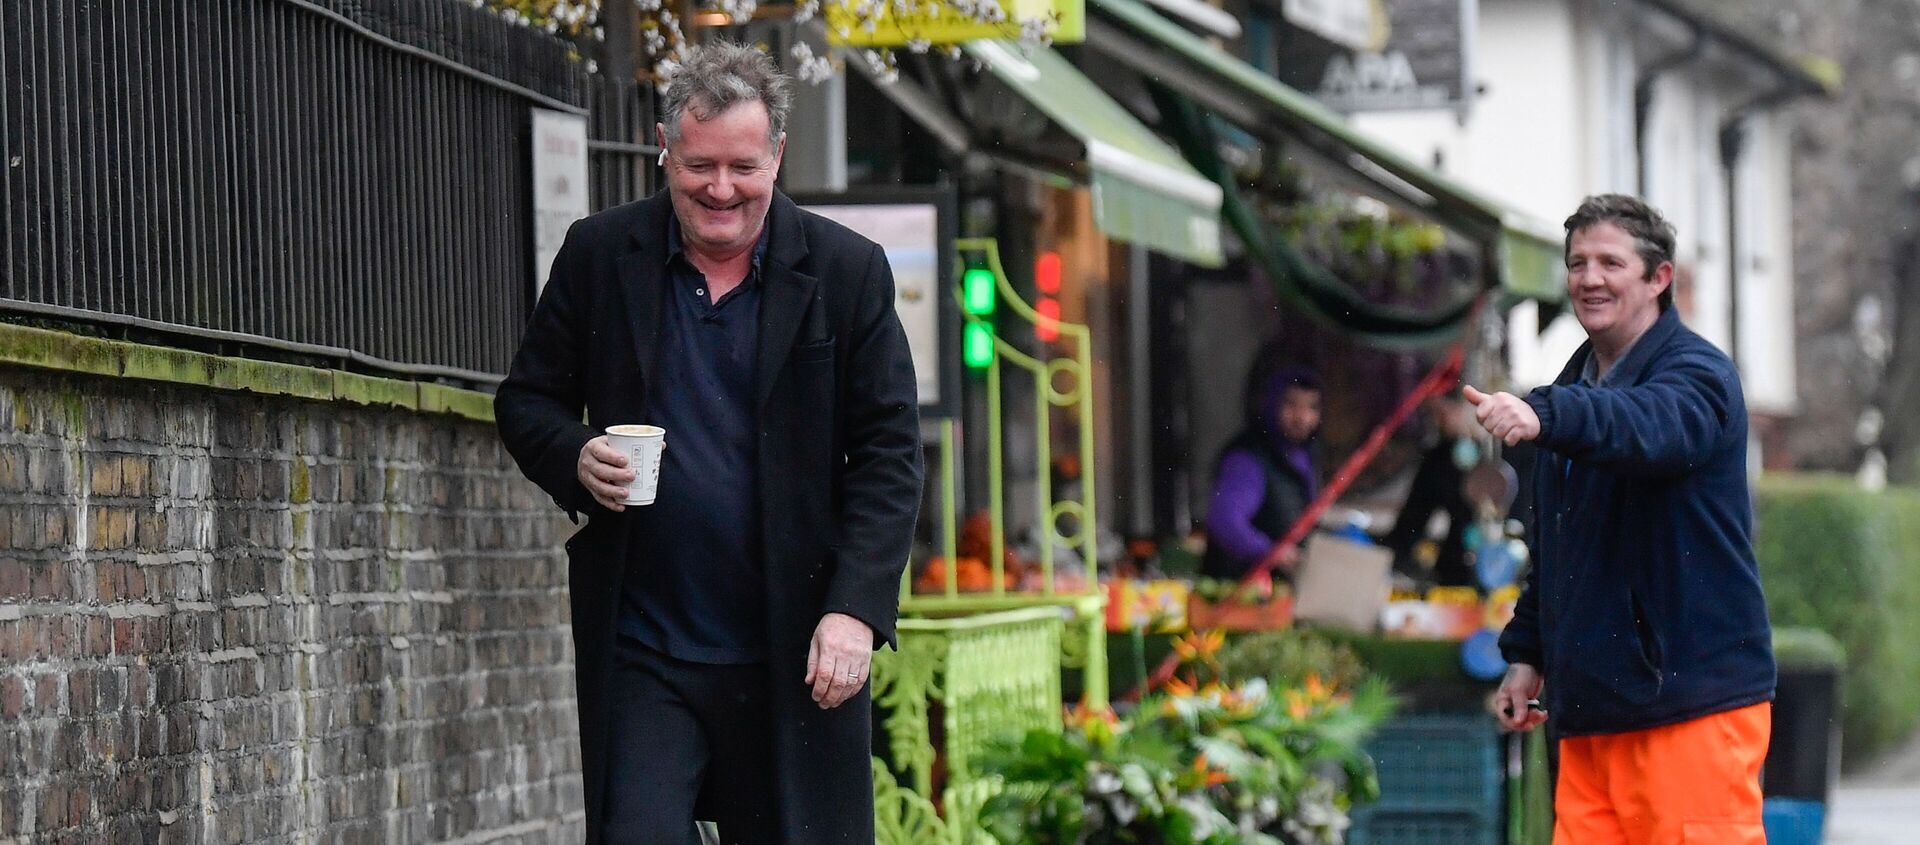 A passerby gestures to journalist and television presenter Piers Morgan, after he left his high-profile breakfast slot with the broadcaster ITV, following his long-running criticism of Prince Harry's wife Meghan, in London, Britain, 10 March 2021 - Sputnik International, 1920, 06.04.2021